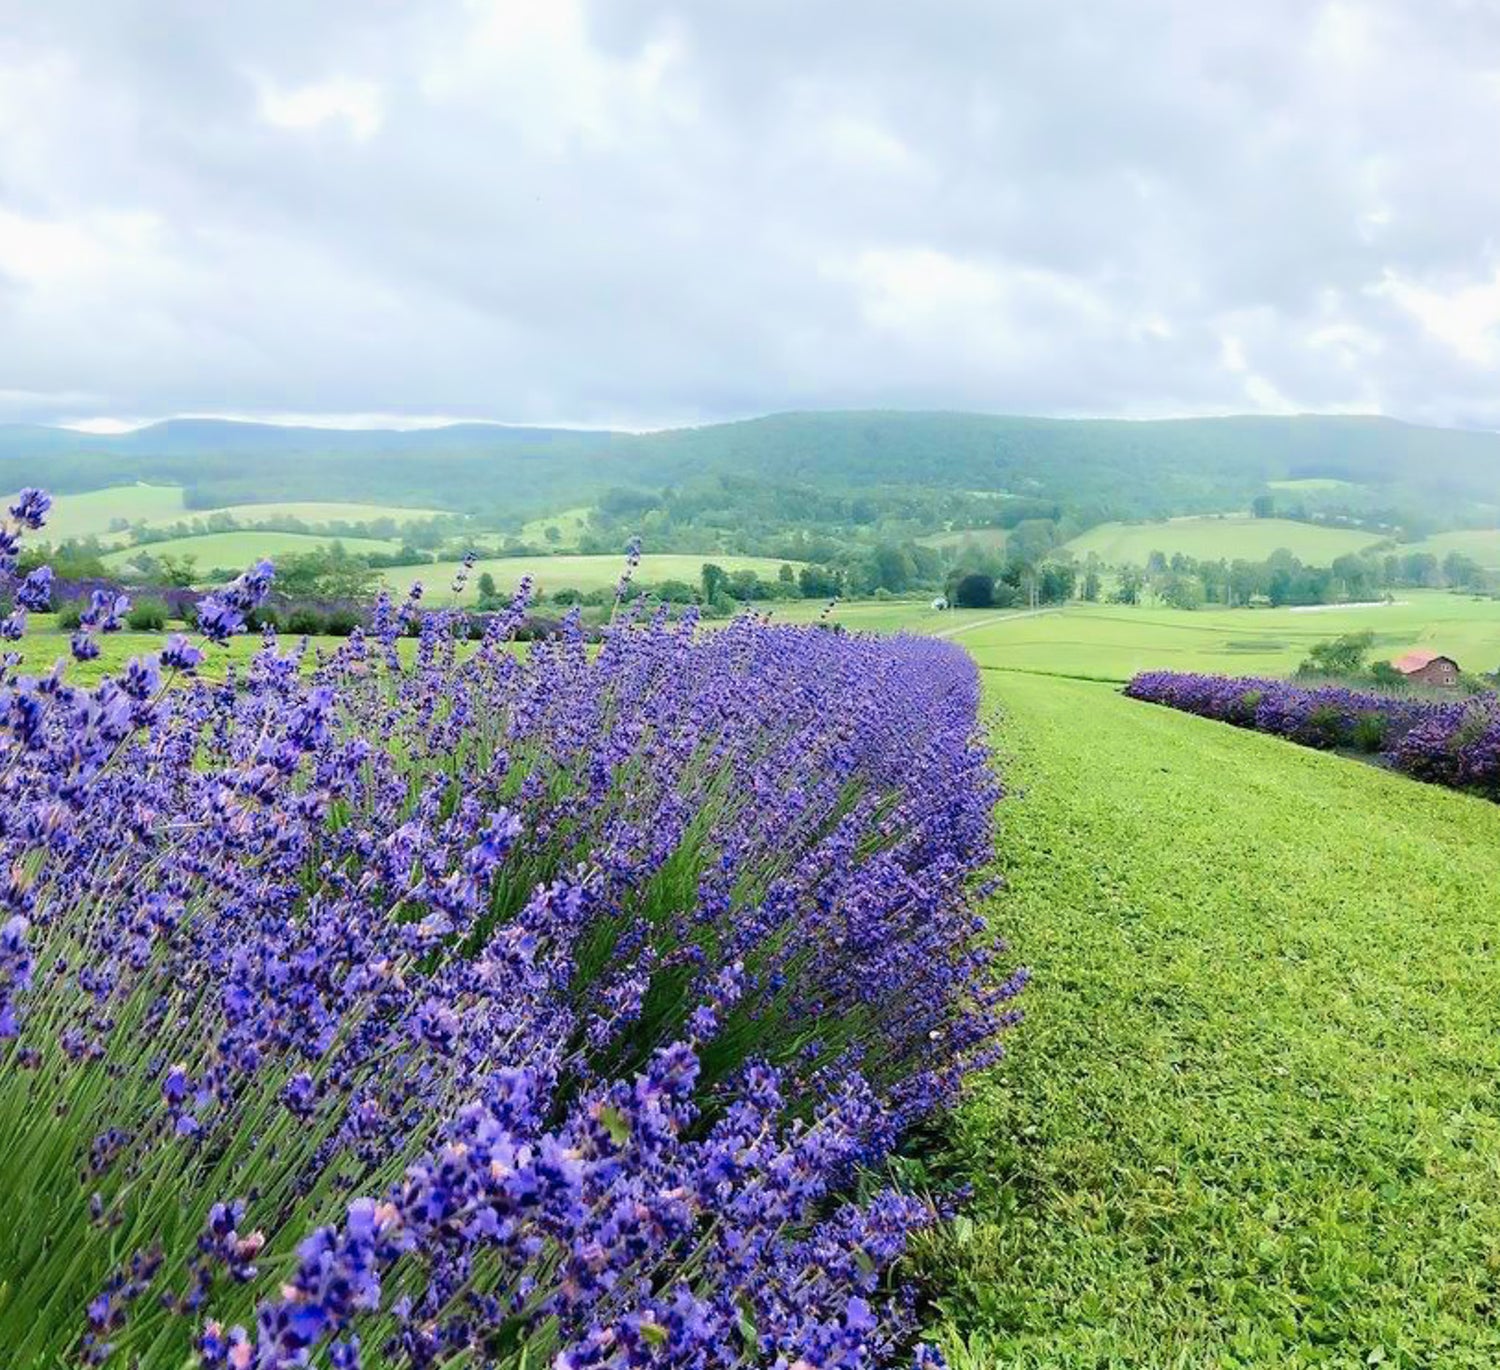 A view from the end of a lavender row at the Slate Hill Flower Farm. There are multiple beautiful lavender plants going straight down the row, with a gorgeous view of the Mohawk Valley hills.